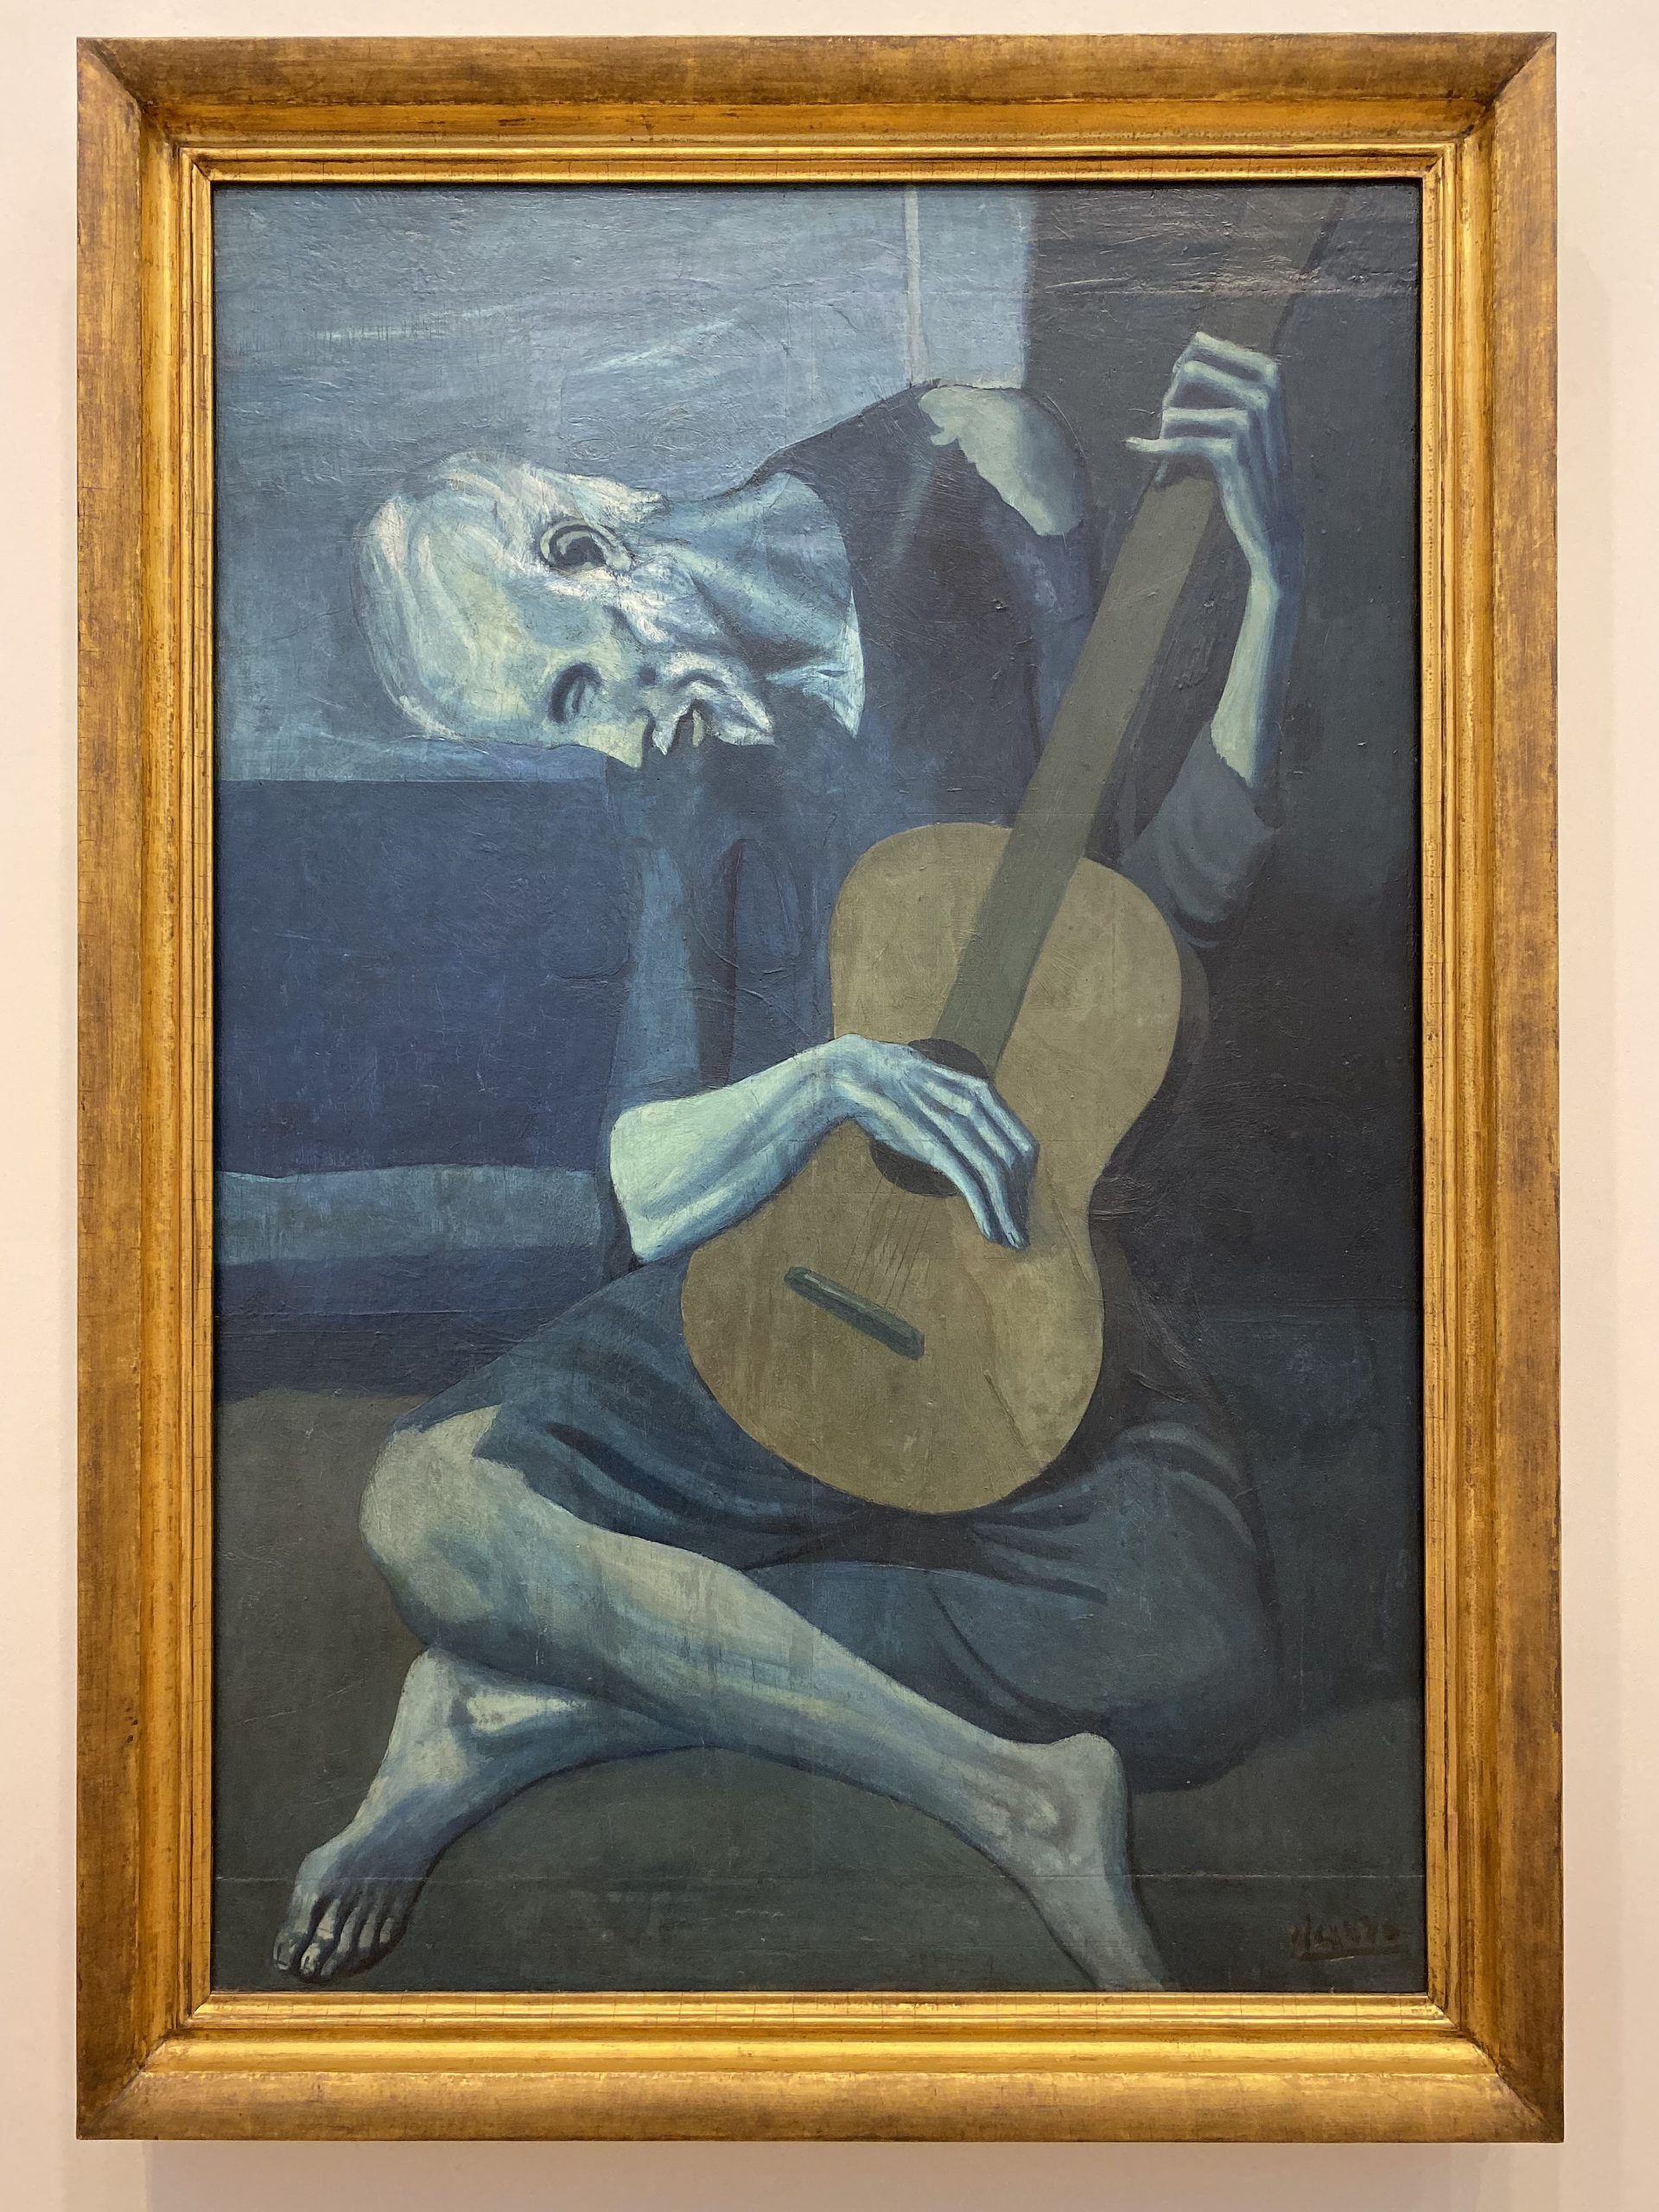 Details about   Picasso painting Old Guitarist 